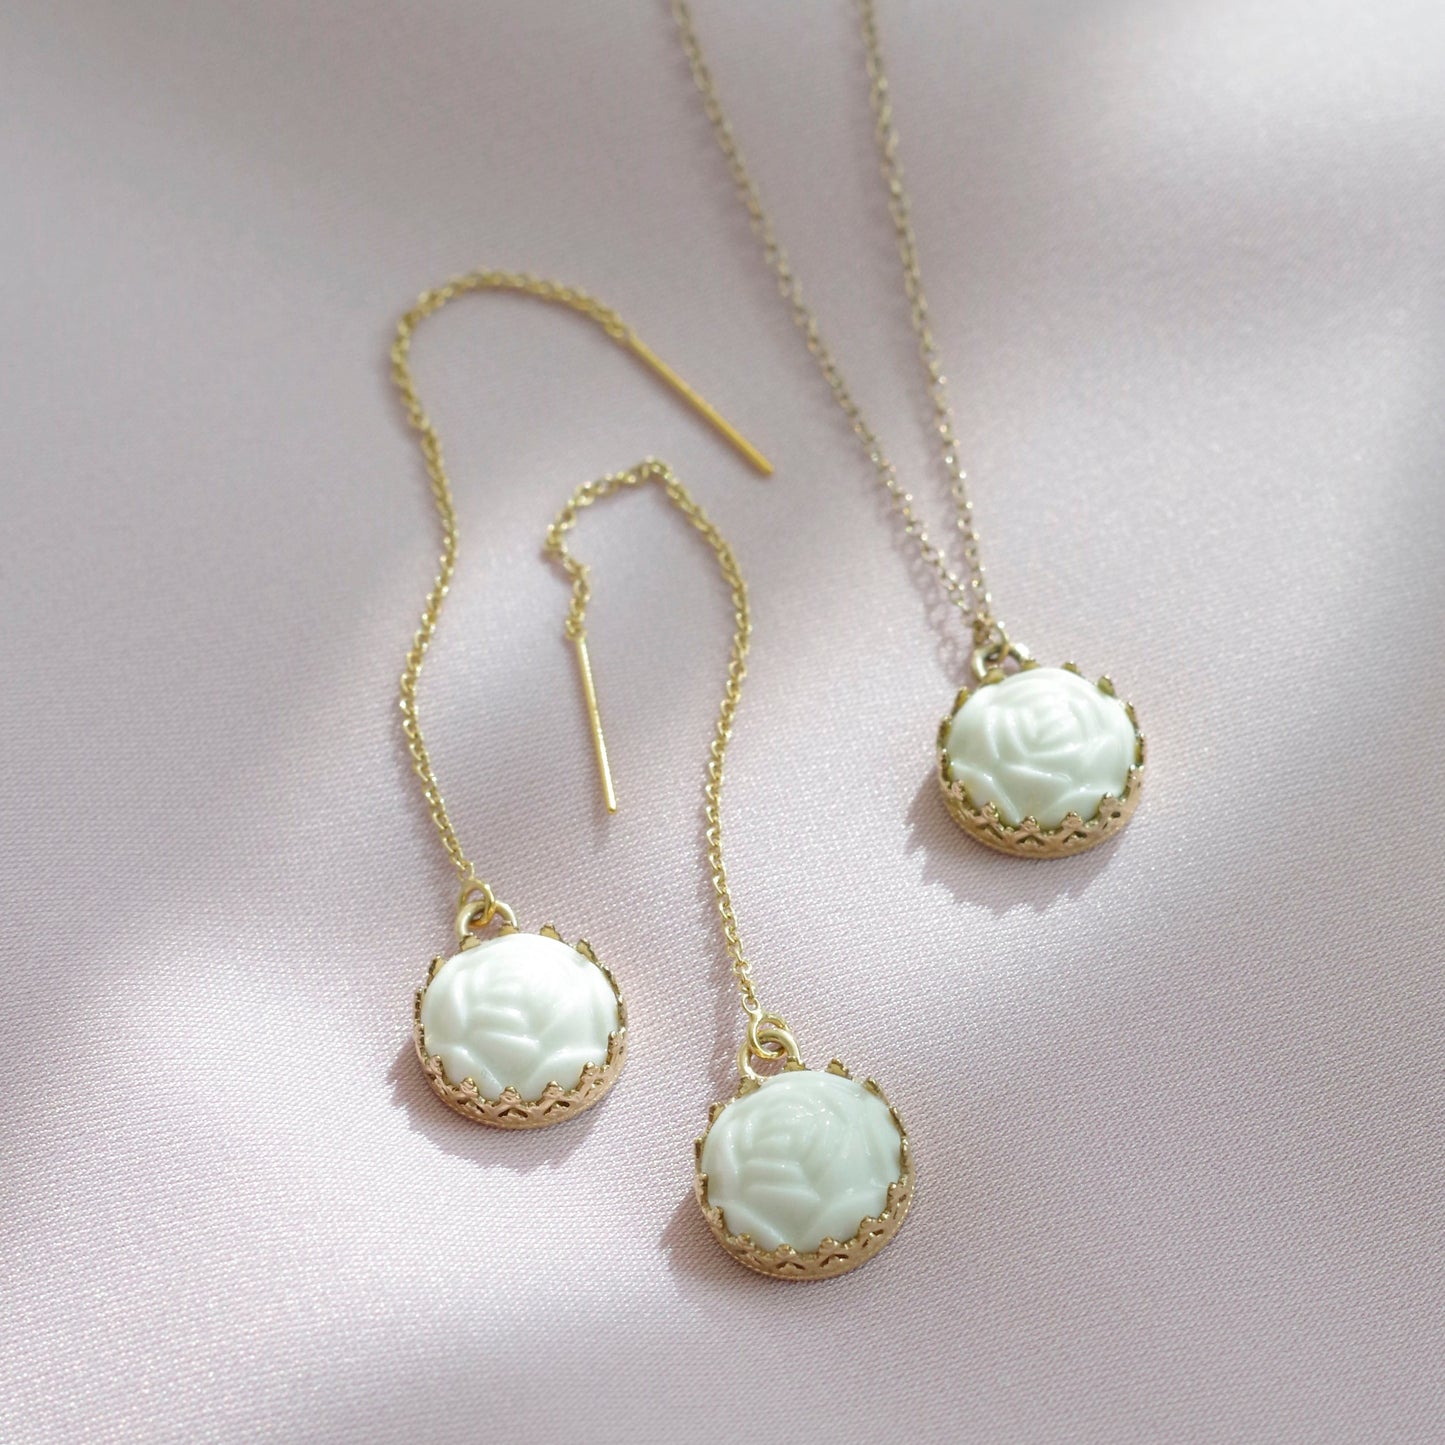 Mini Porcelain Rose With Gold-Filled Chain Earrings